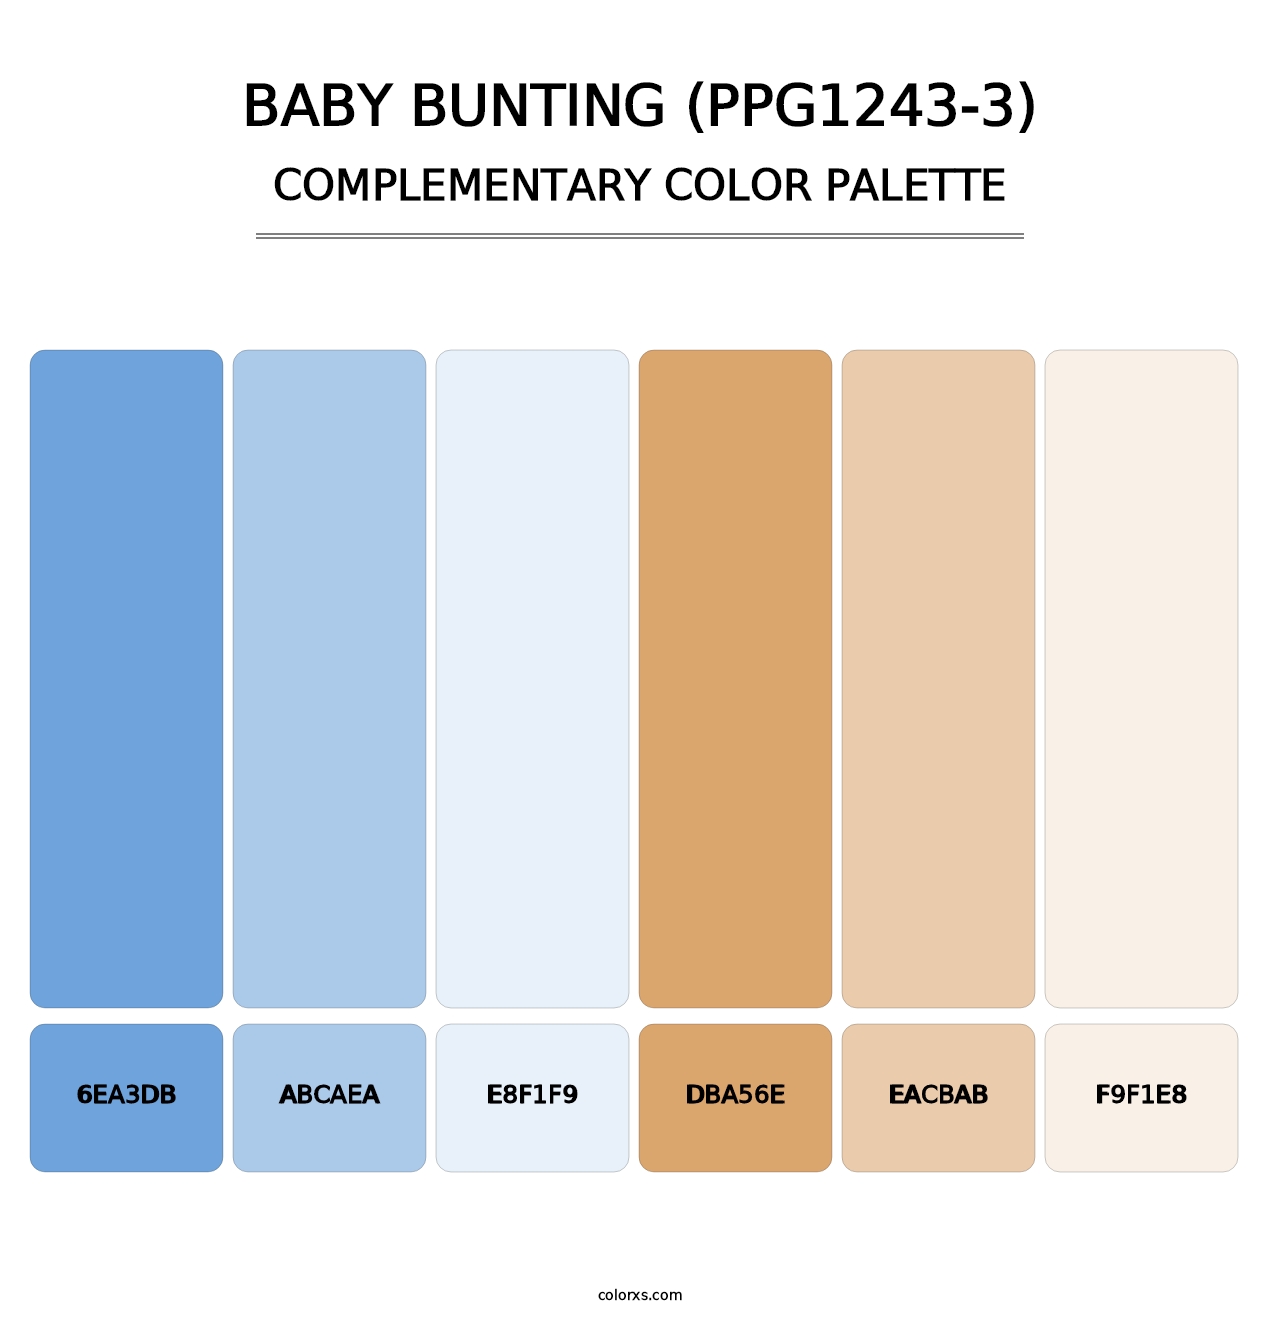 Baby Bunting (PPG1243-3) - Complementary Color Palette